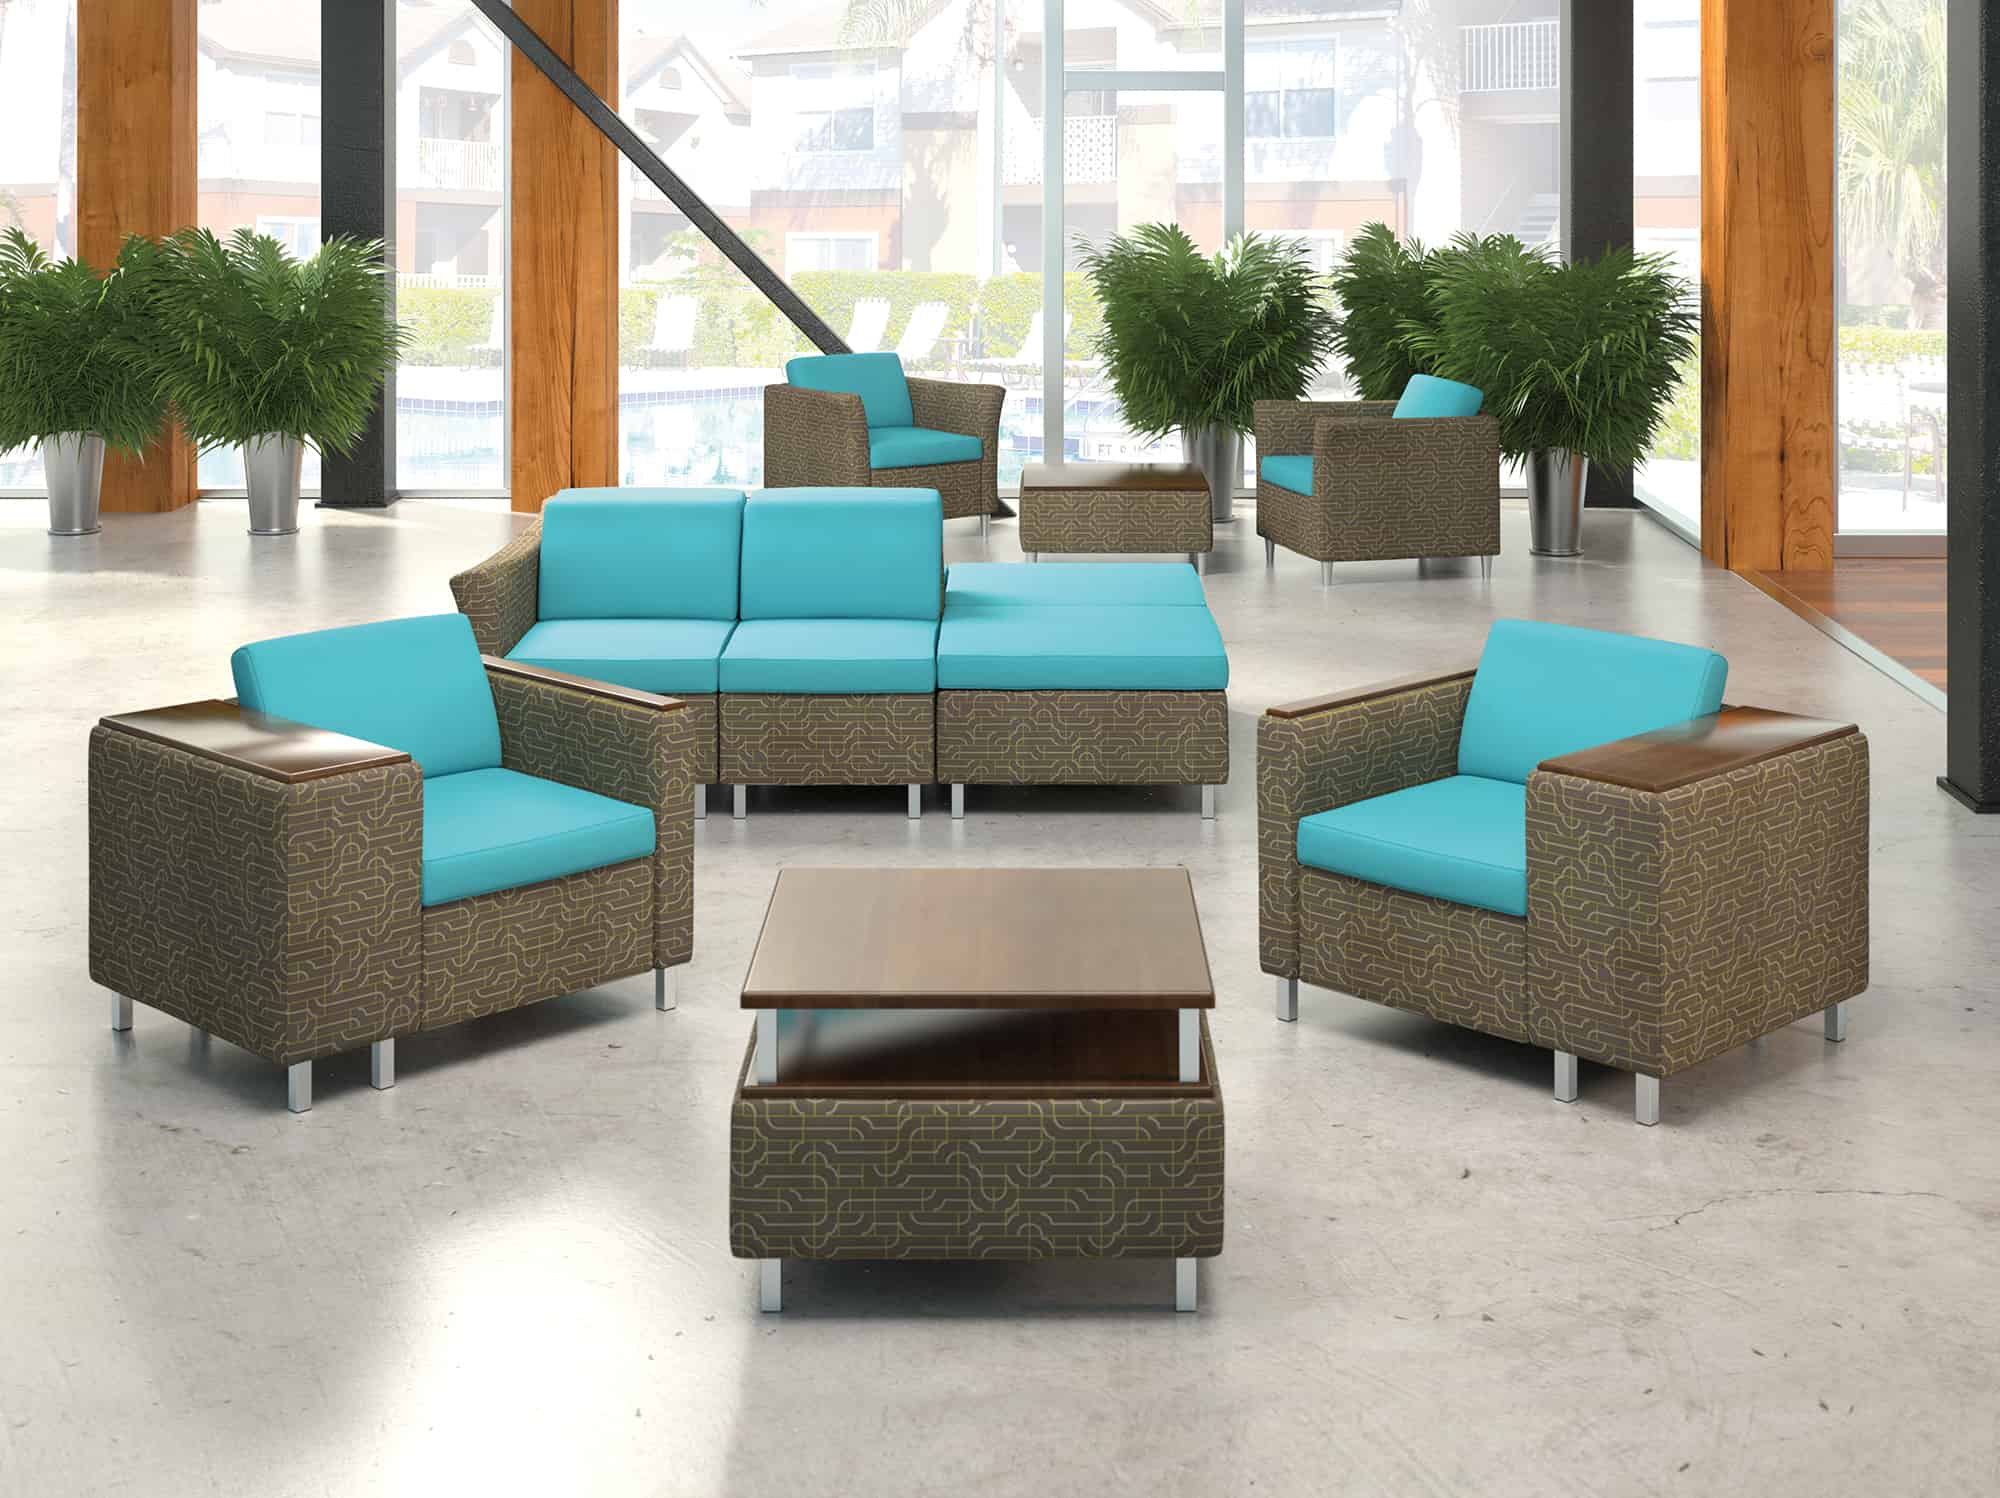 Rally Lounge Seating in public space